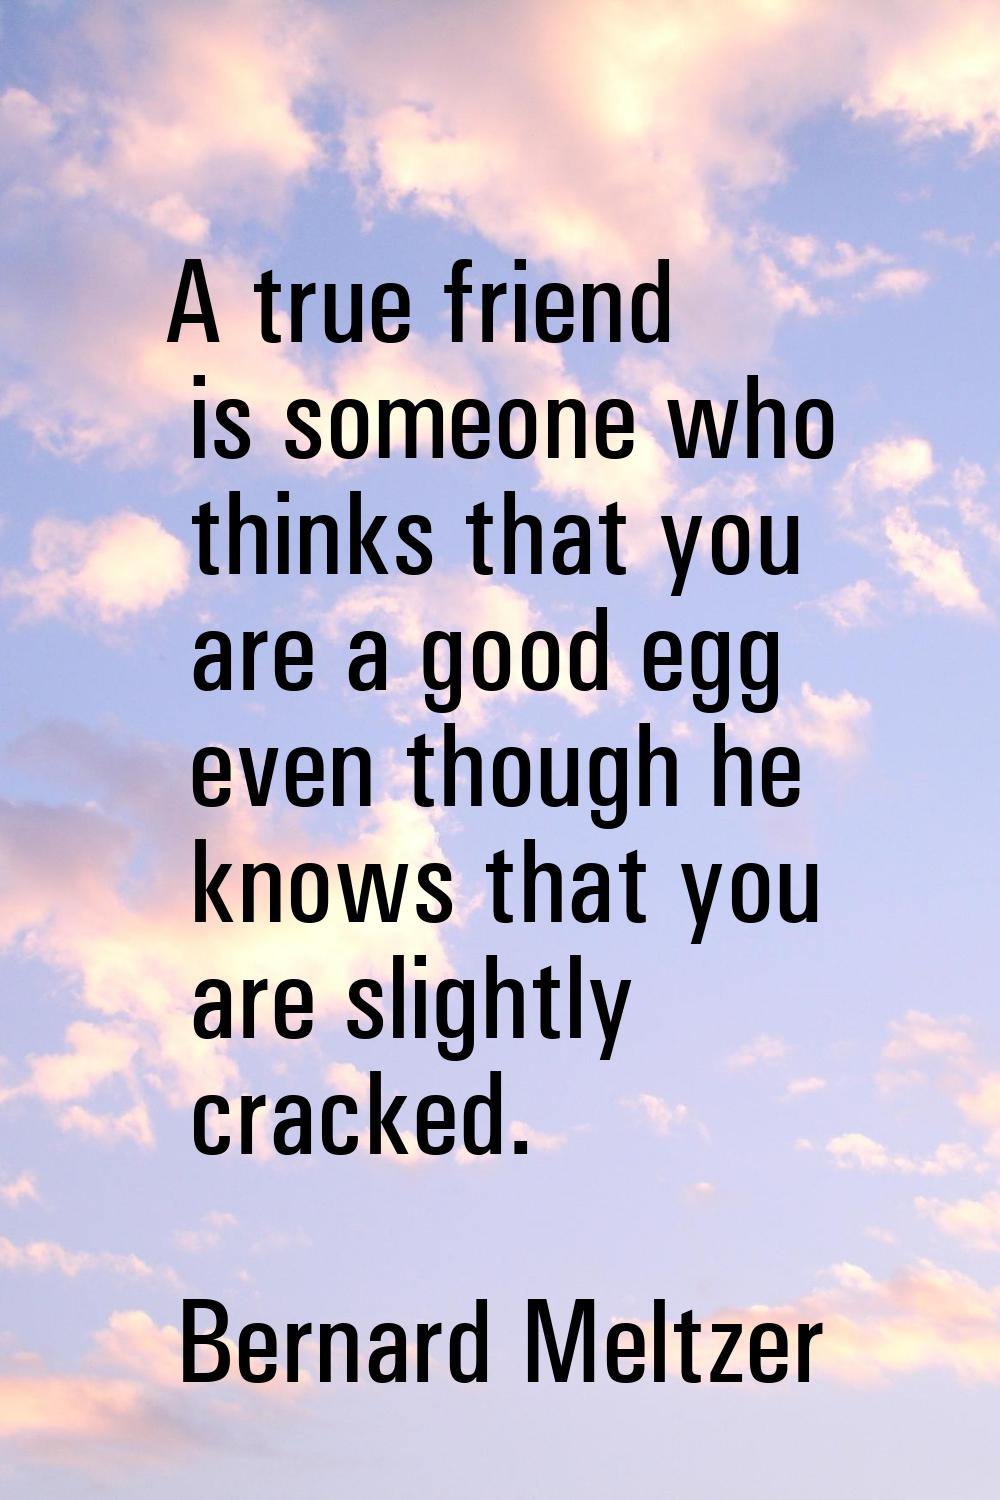 A true friend is someone who thinks that you are a good egg even though he knows that you are sligh